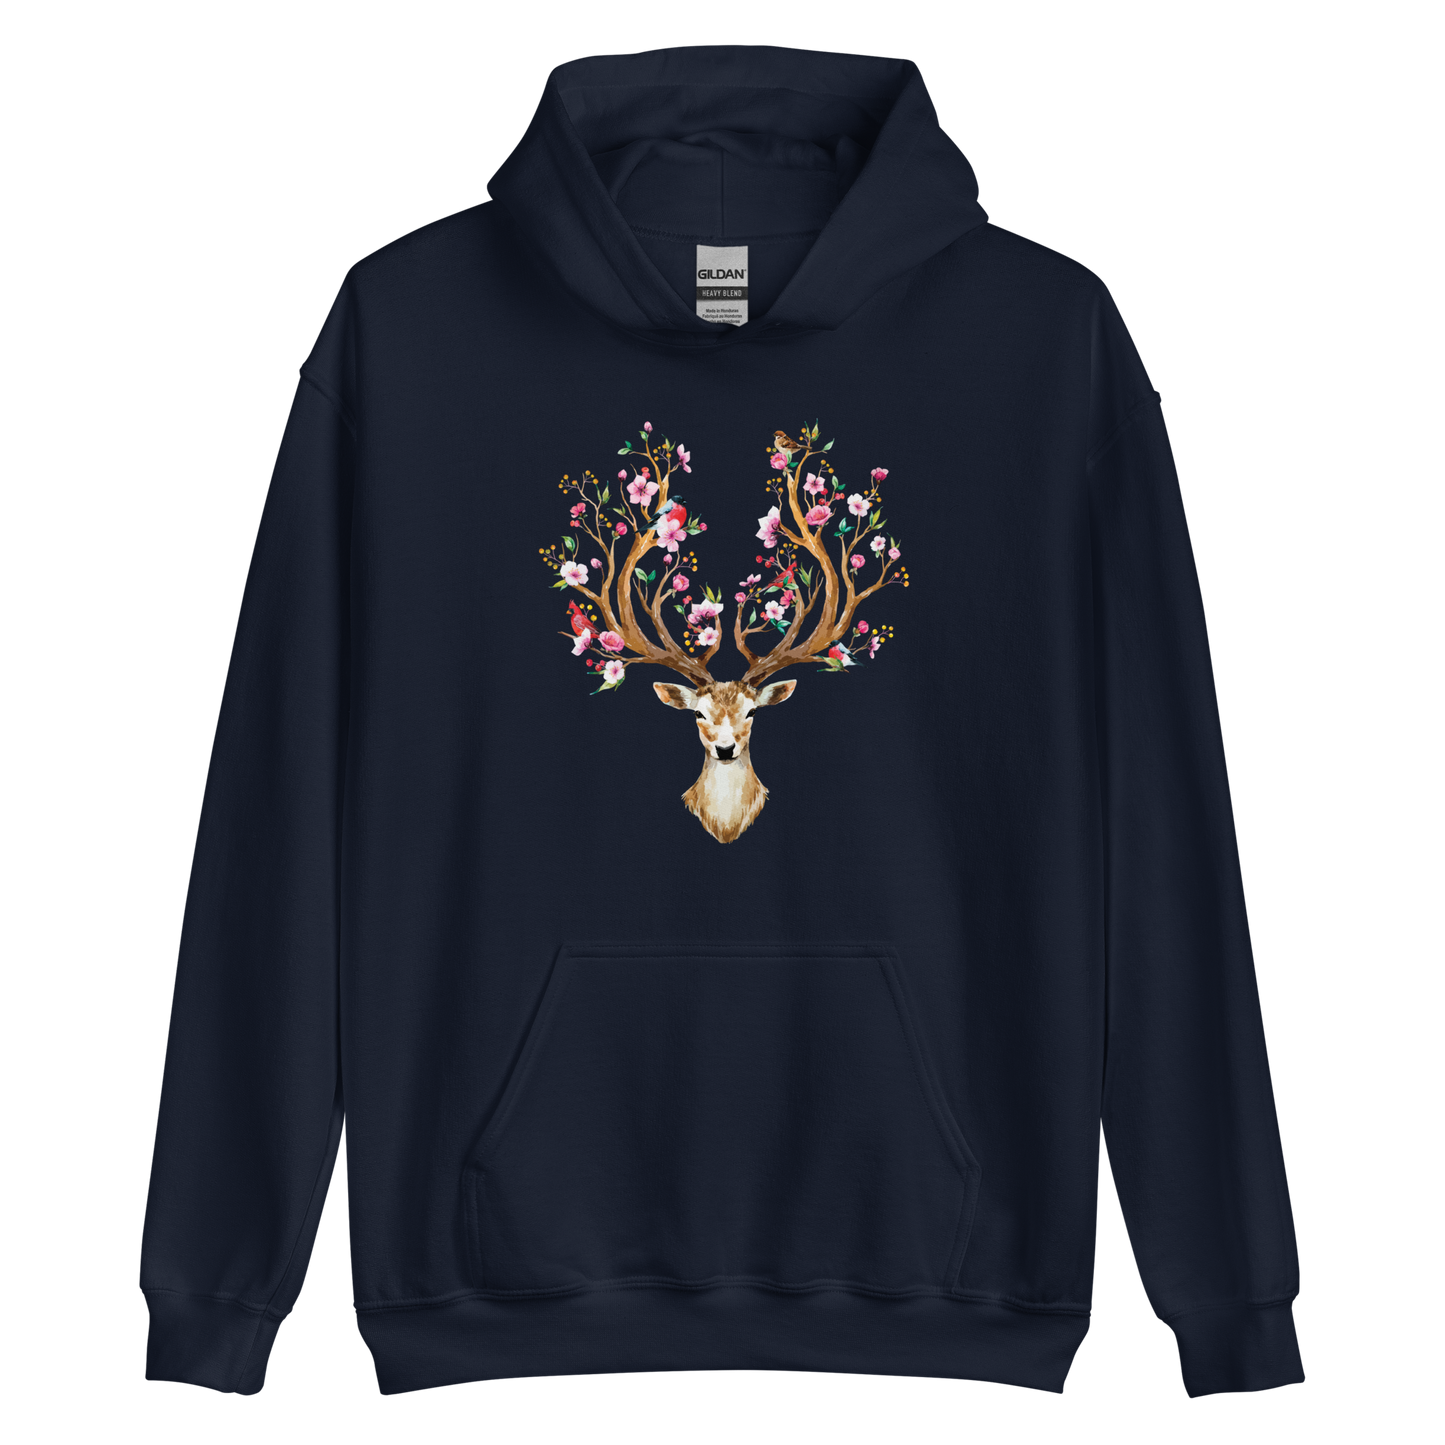 Navy Floral Red Deer Hoodie featuring a captivating Floral Red Deer graphic on the chest - Cute Graphic Deer Hoodies - Boozy Fox